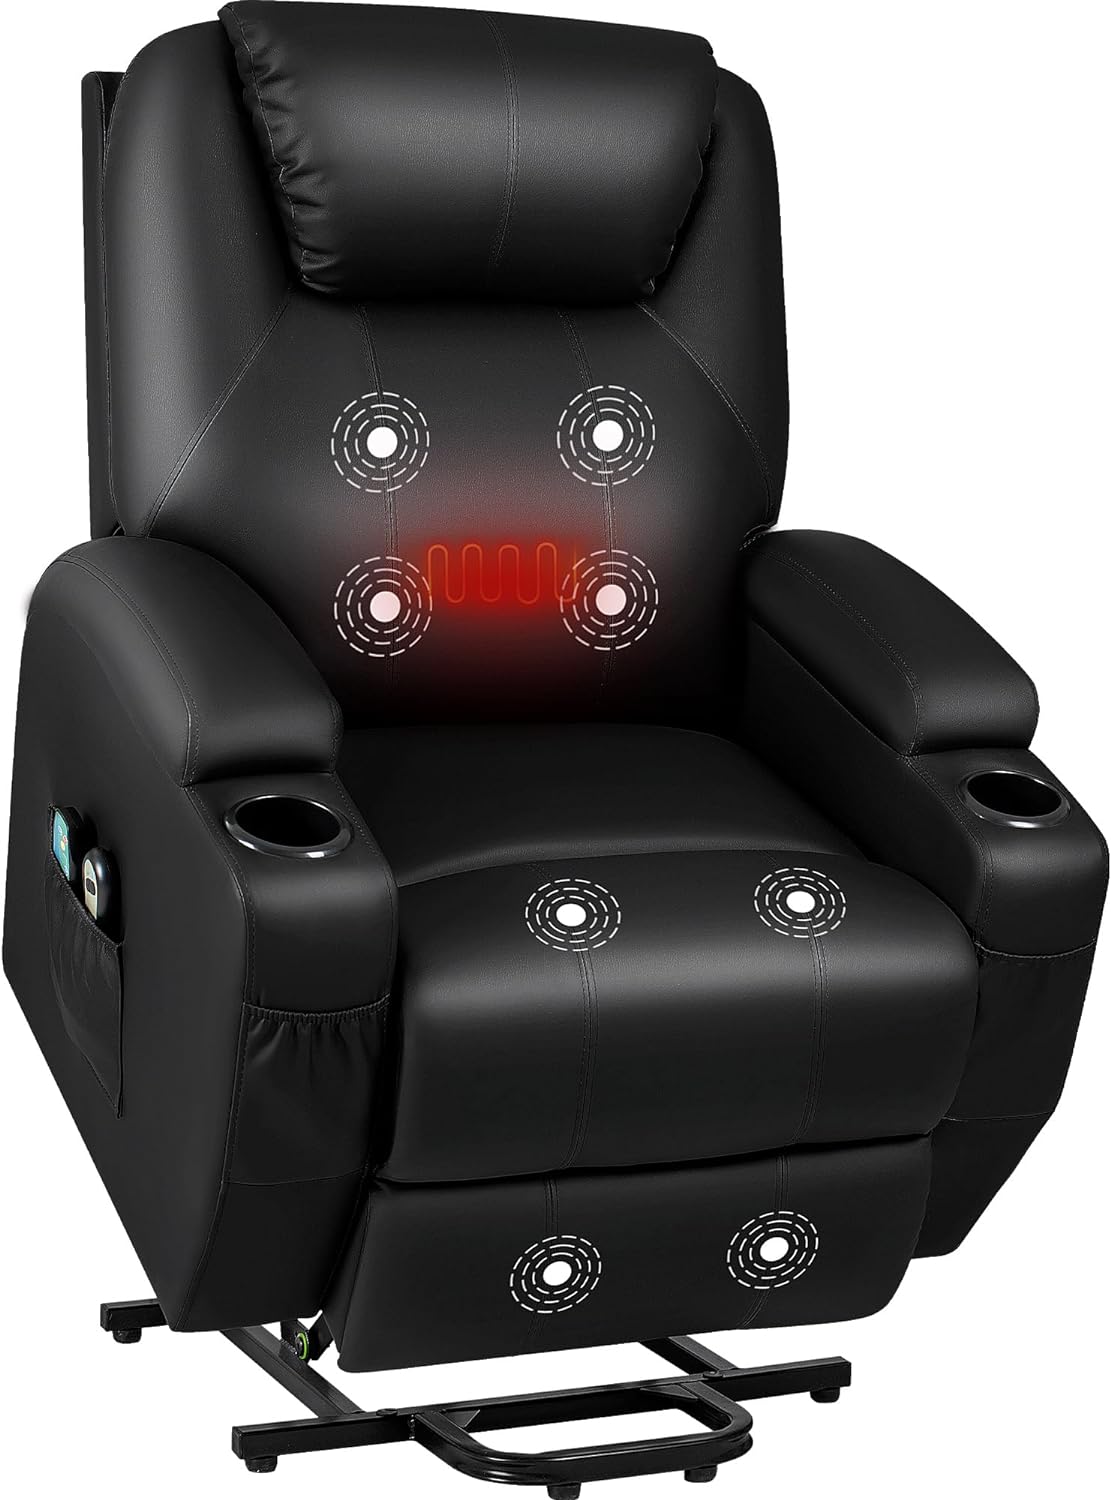 JUMMICO-Power-Lift-Recliner-Chair-with-Heat-and-Massage-for-Elderly - 5 Best Recliners for Back Pain